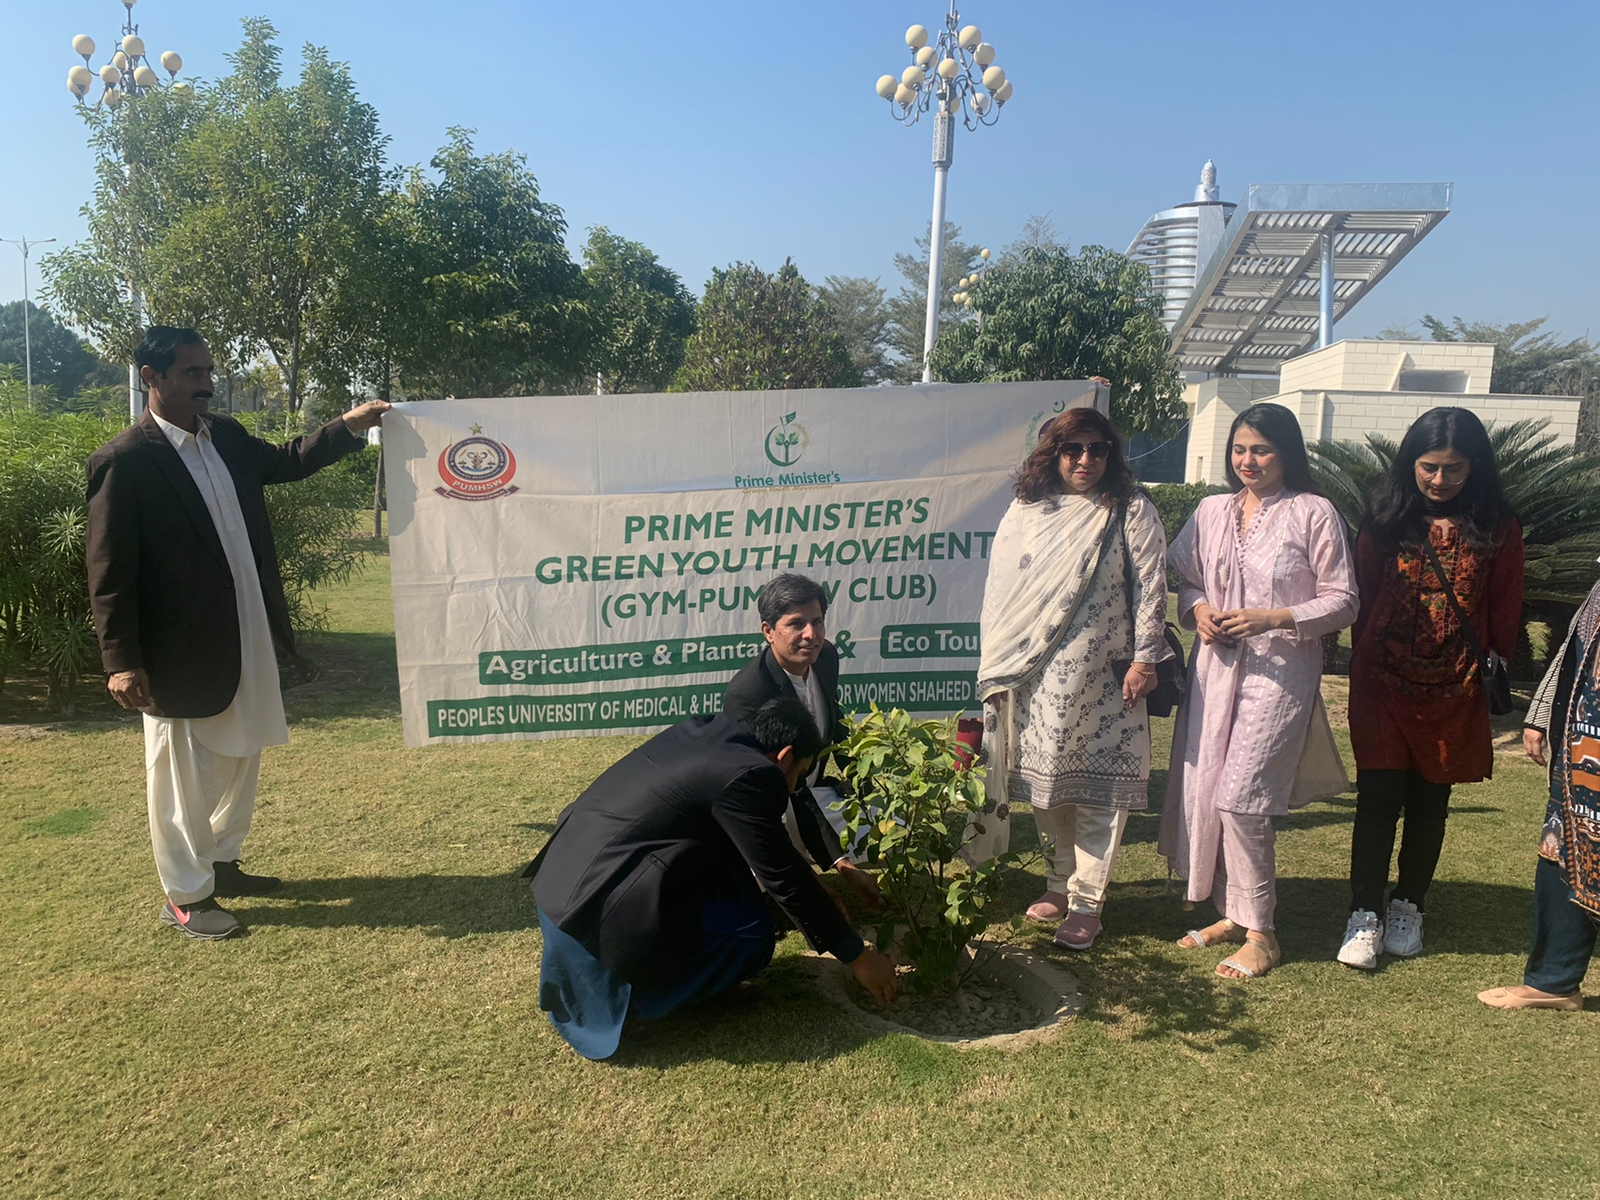 Plantation drive and Eco-Tourism was held under the initiative of Prime Minister Green Youth Movement Club People's University of Medical and Health Sciences for Women, Nawab shah. The students planted at the site and during the session, the students got to know the importance of plantation for improving the environment. 